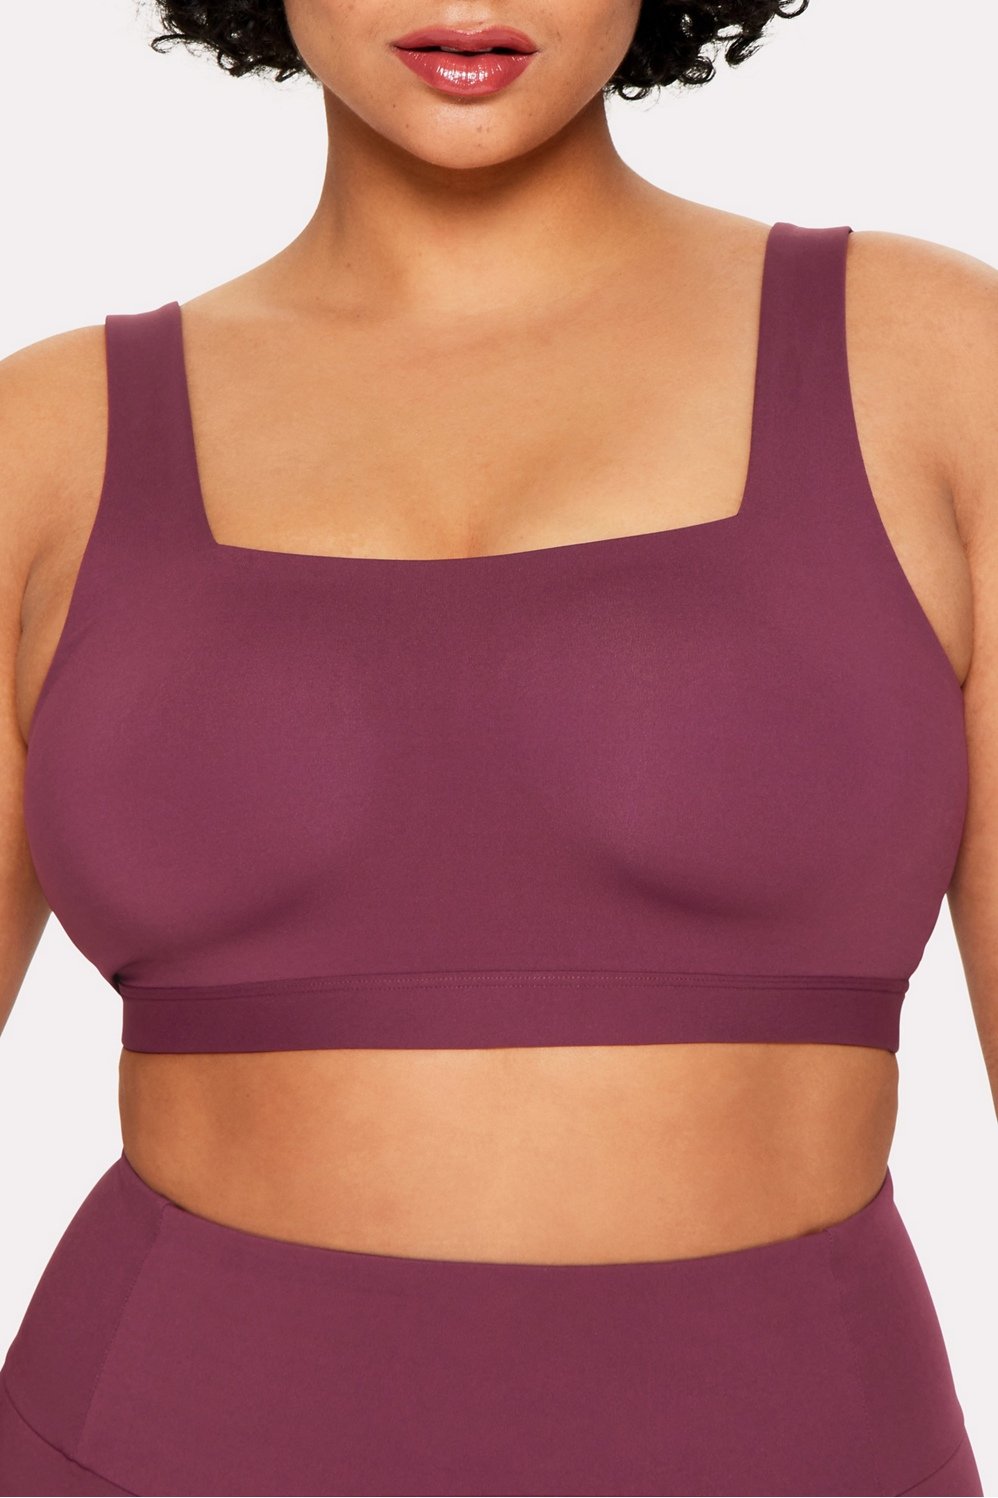 New Longline Macaroon Sport Bra ✨ It came with built-in padded